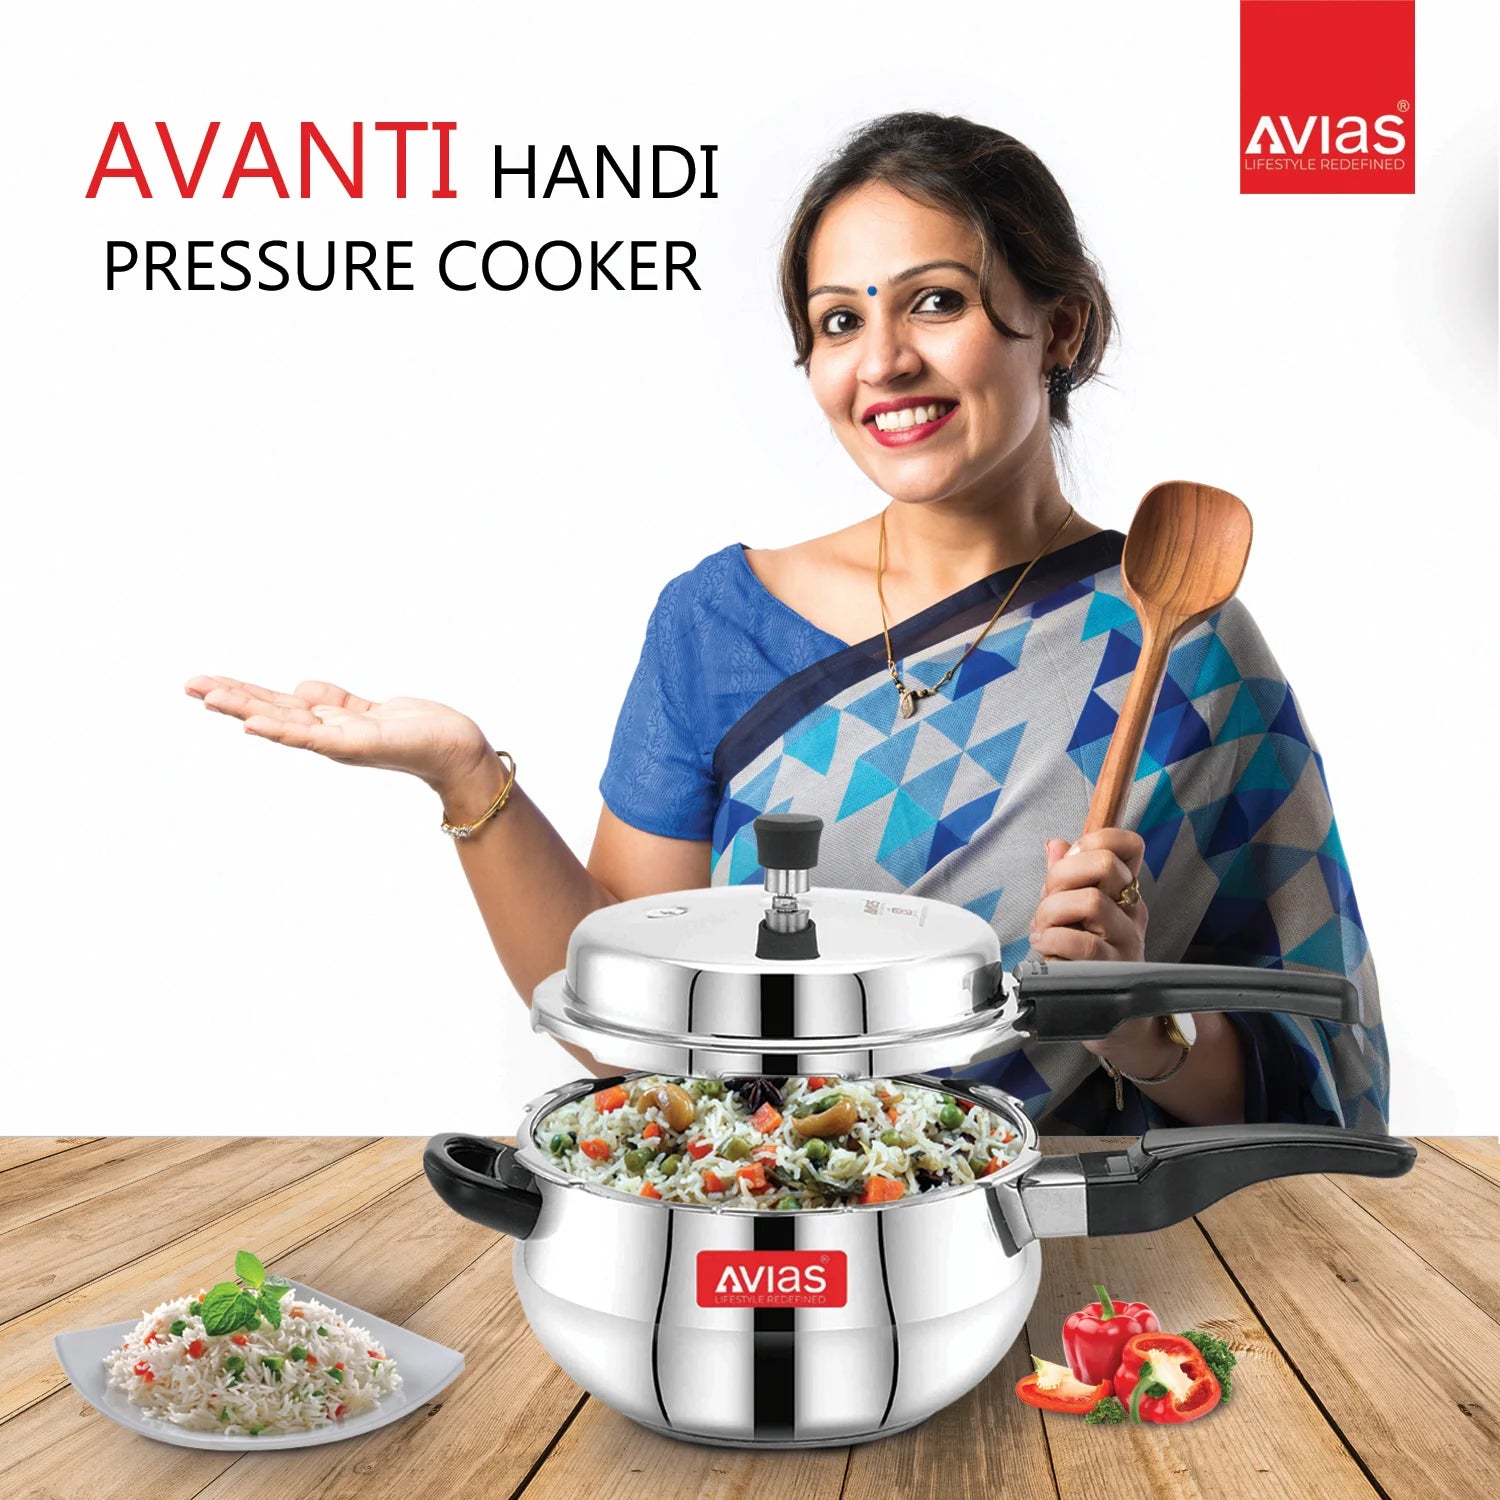 AVIAS Avanti Handi high-quality stainless steel pressure cooker for cooking quality food